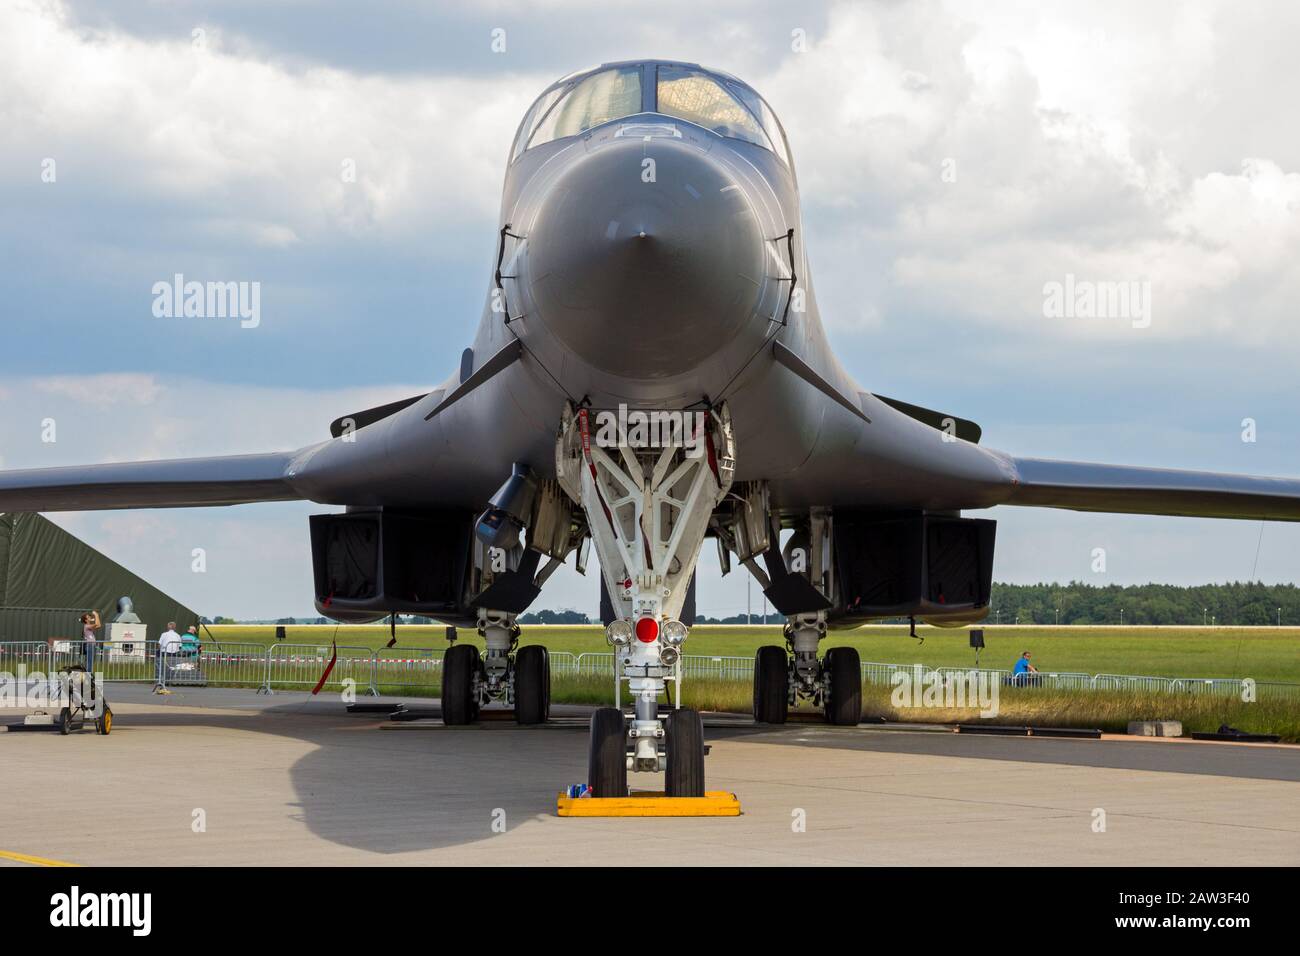 BERLIN, GERMANY - JUNE 2, 2016: US Air Force strategic bomber B-1B Lancer on display at the Exhibition ILA Berlin Air Show. Stock Photo